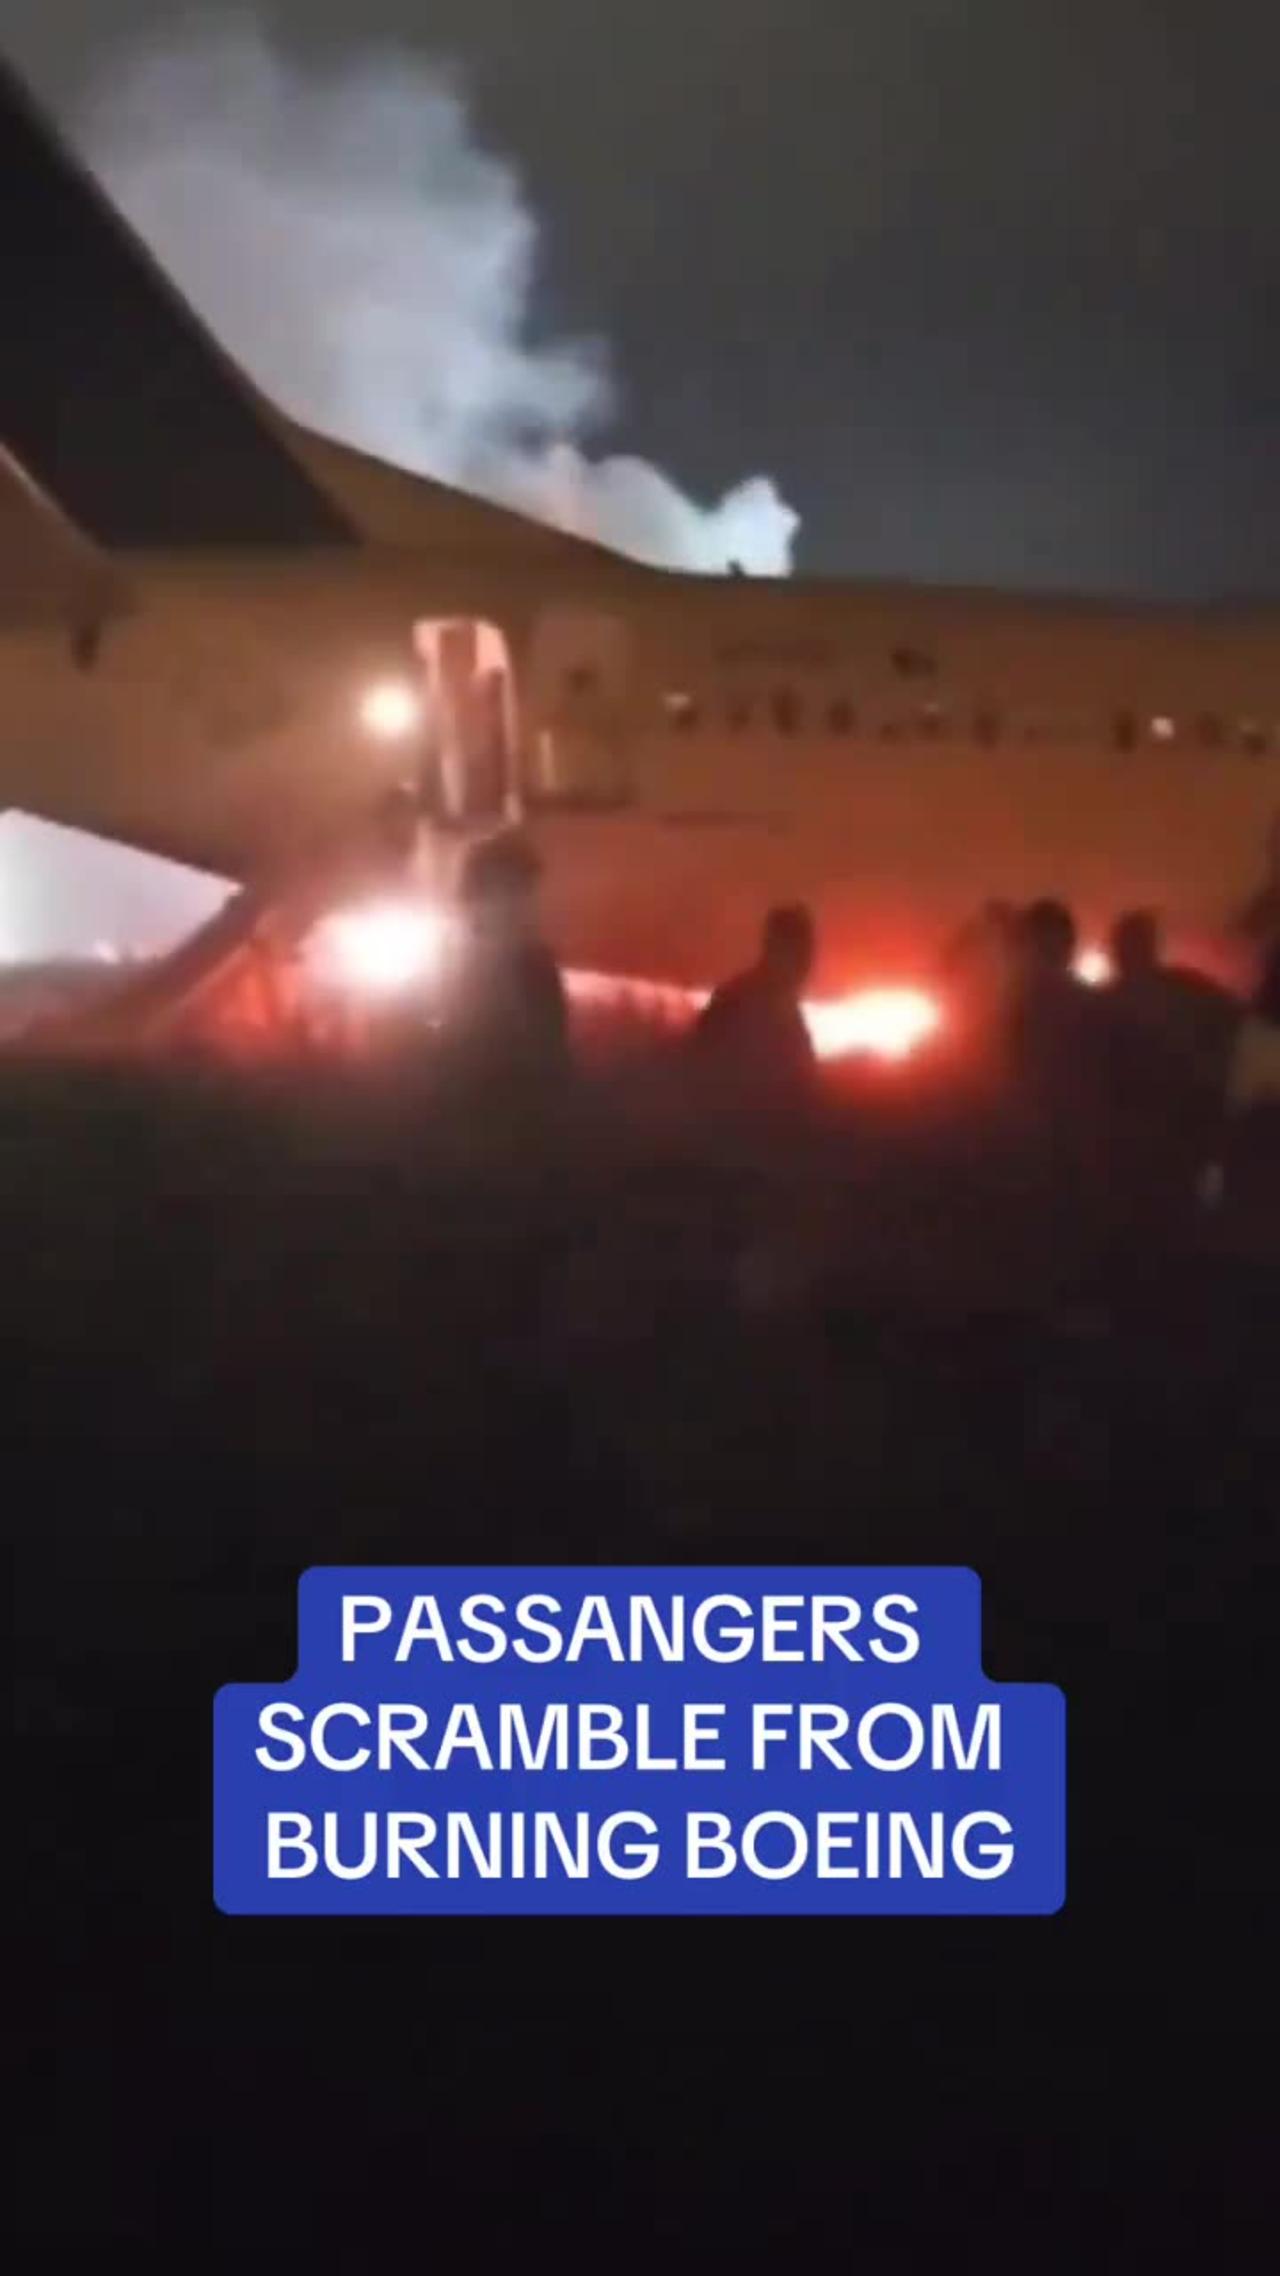 Passengers scramble from burning boeing after a failed takeoff attempt in Senegal